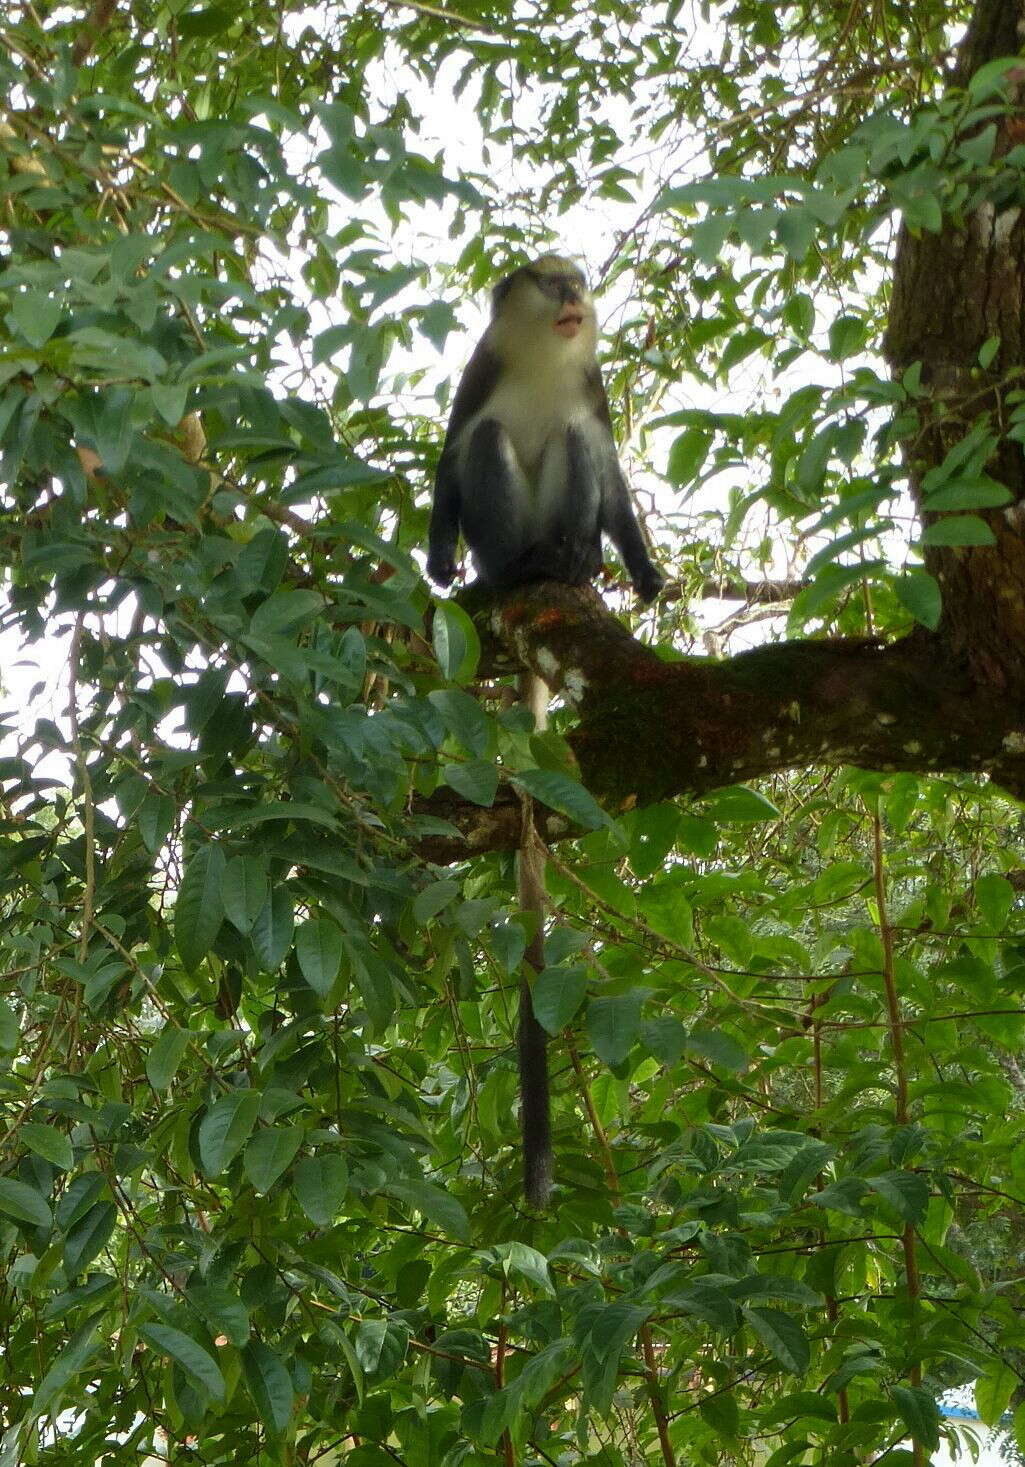 Image of Campbell's Guenon